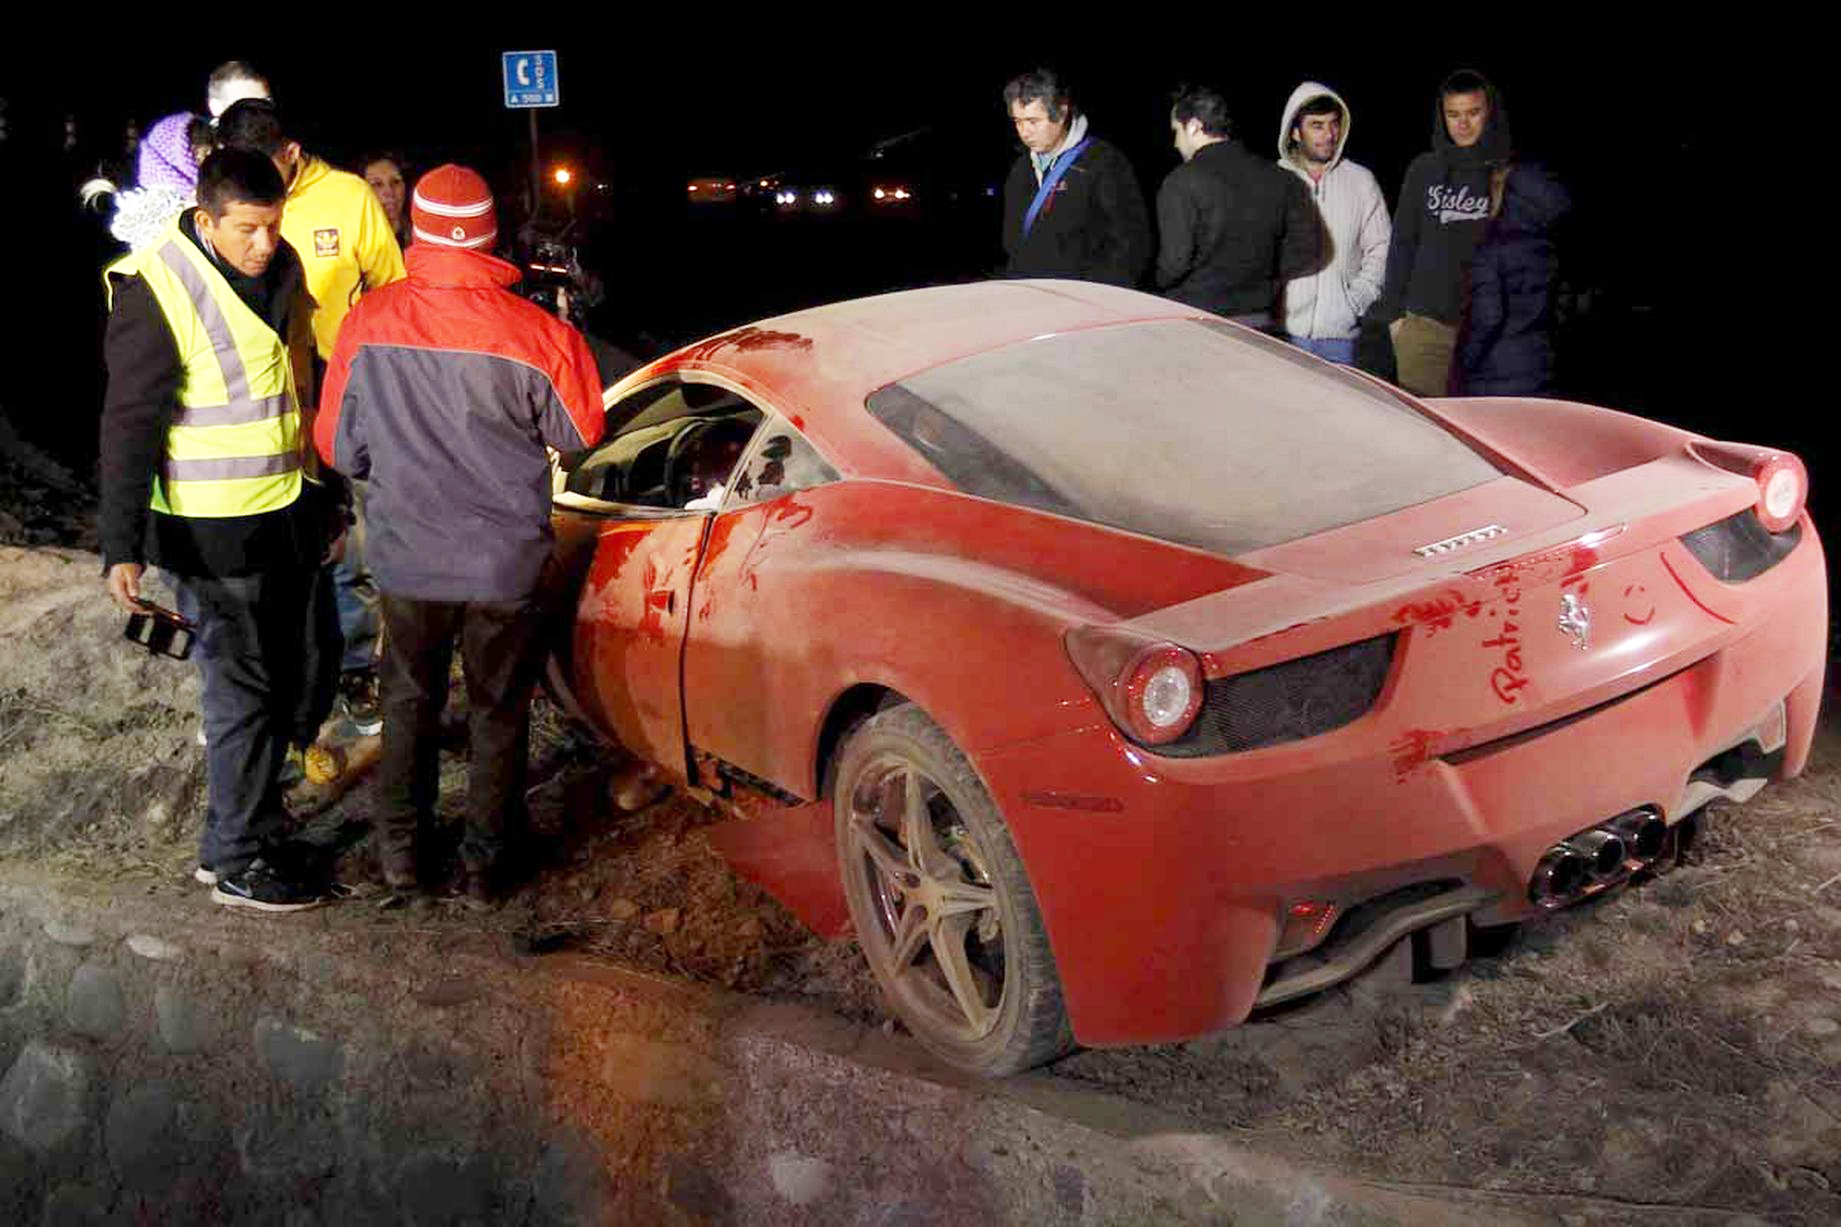 A-red-Ferrari-belonging-to-Arturo-Vidal-is-seen-after-a-car-crash-on-a-highway-south-of-Santiago (2)